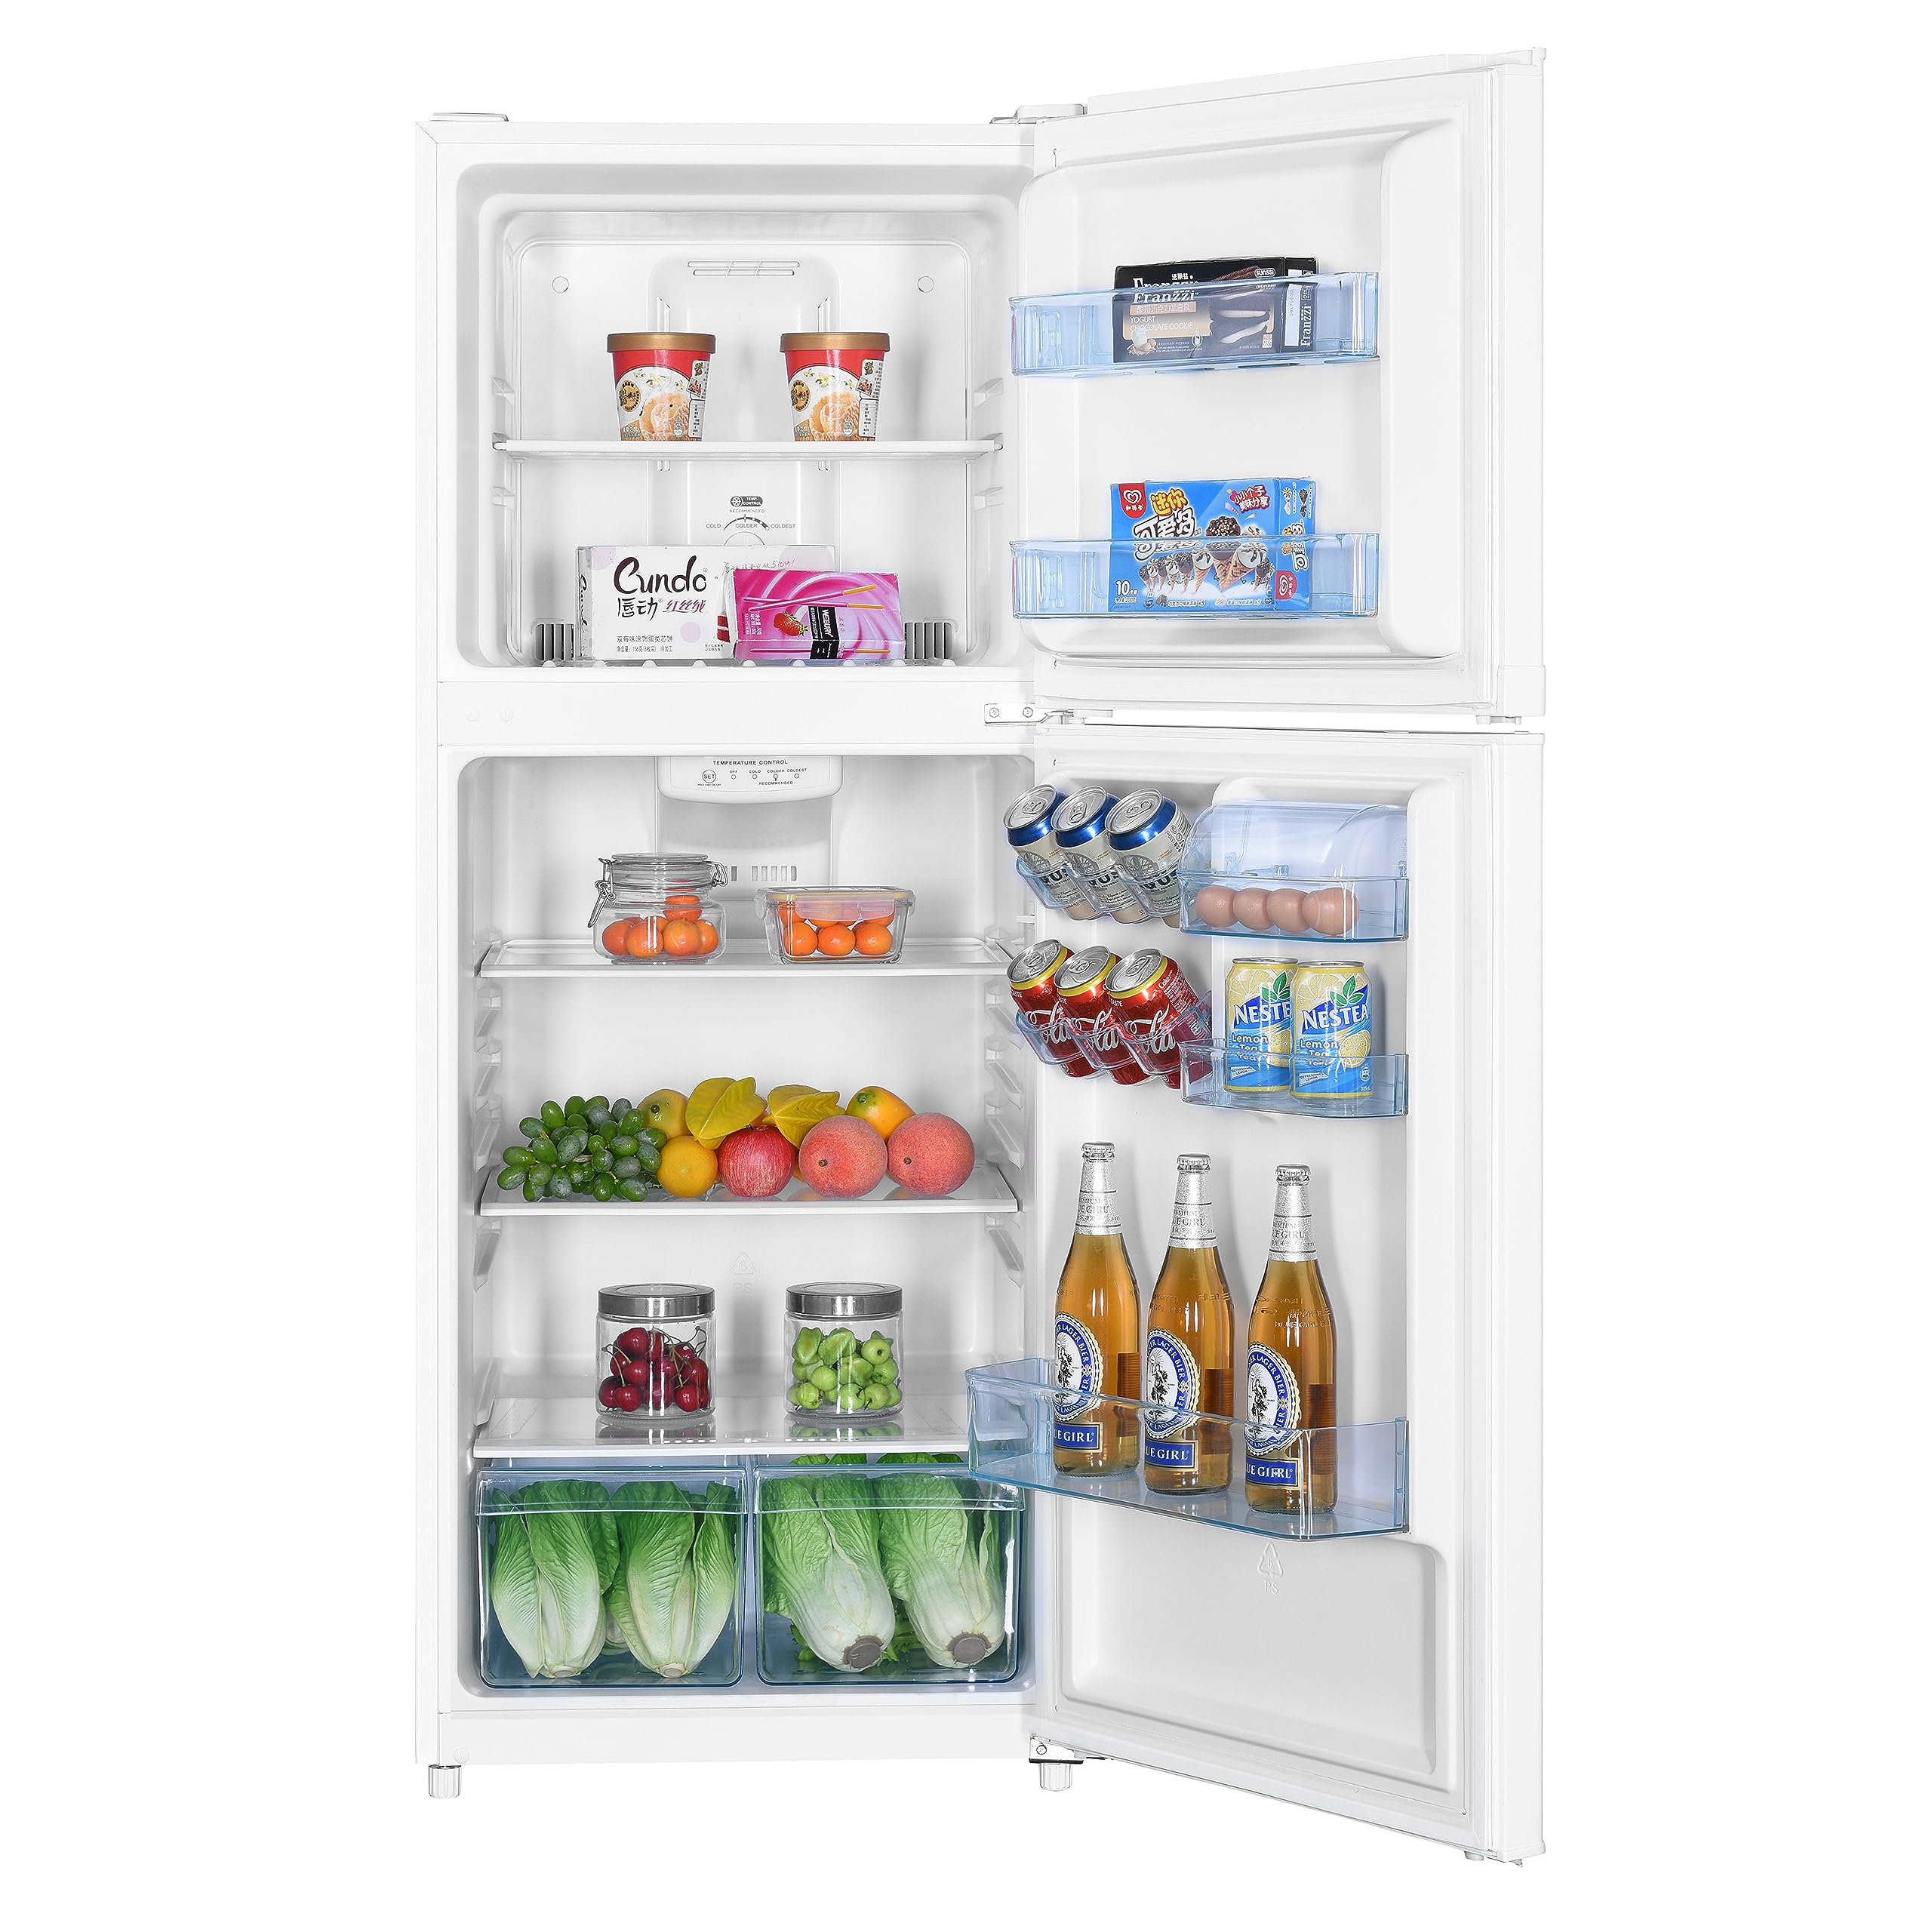 West Bend WB0100TMFBW Frost Free Apartment Size Refrigerator, 10.1-Cu.Ft, White